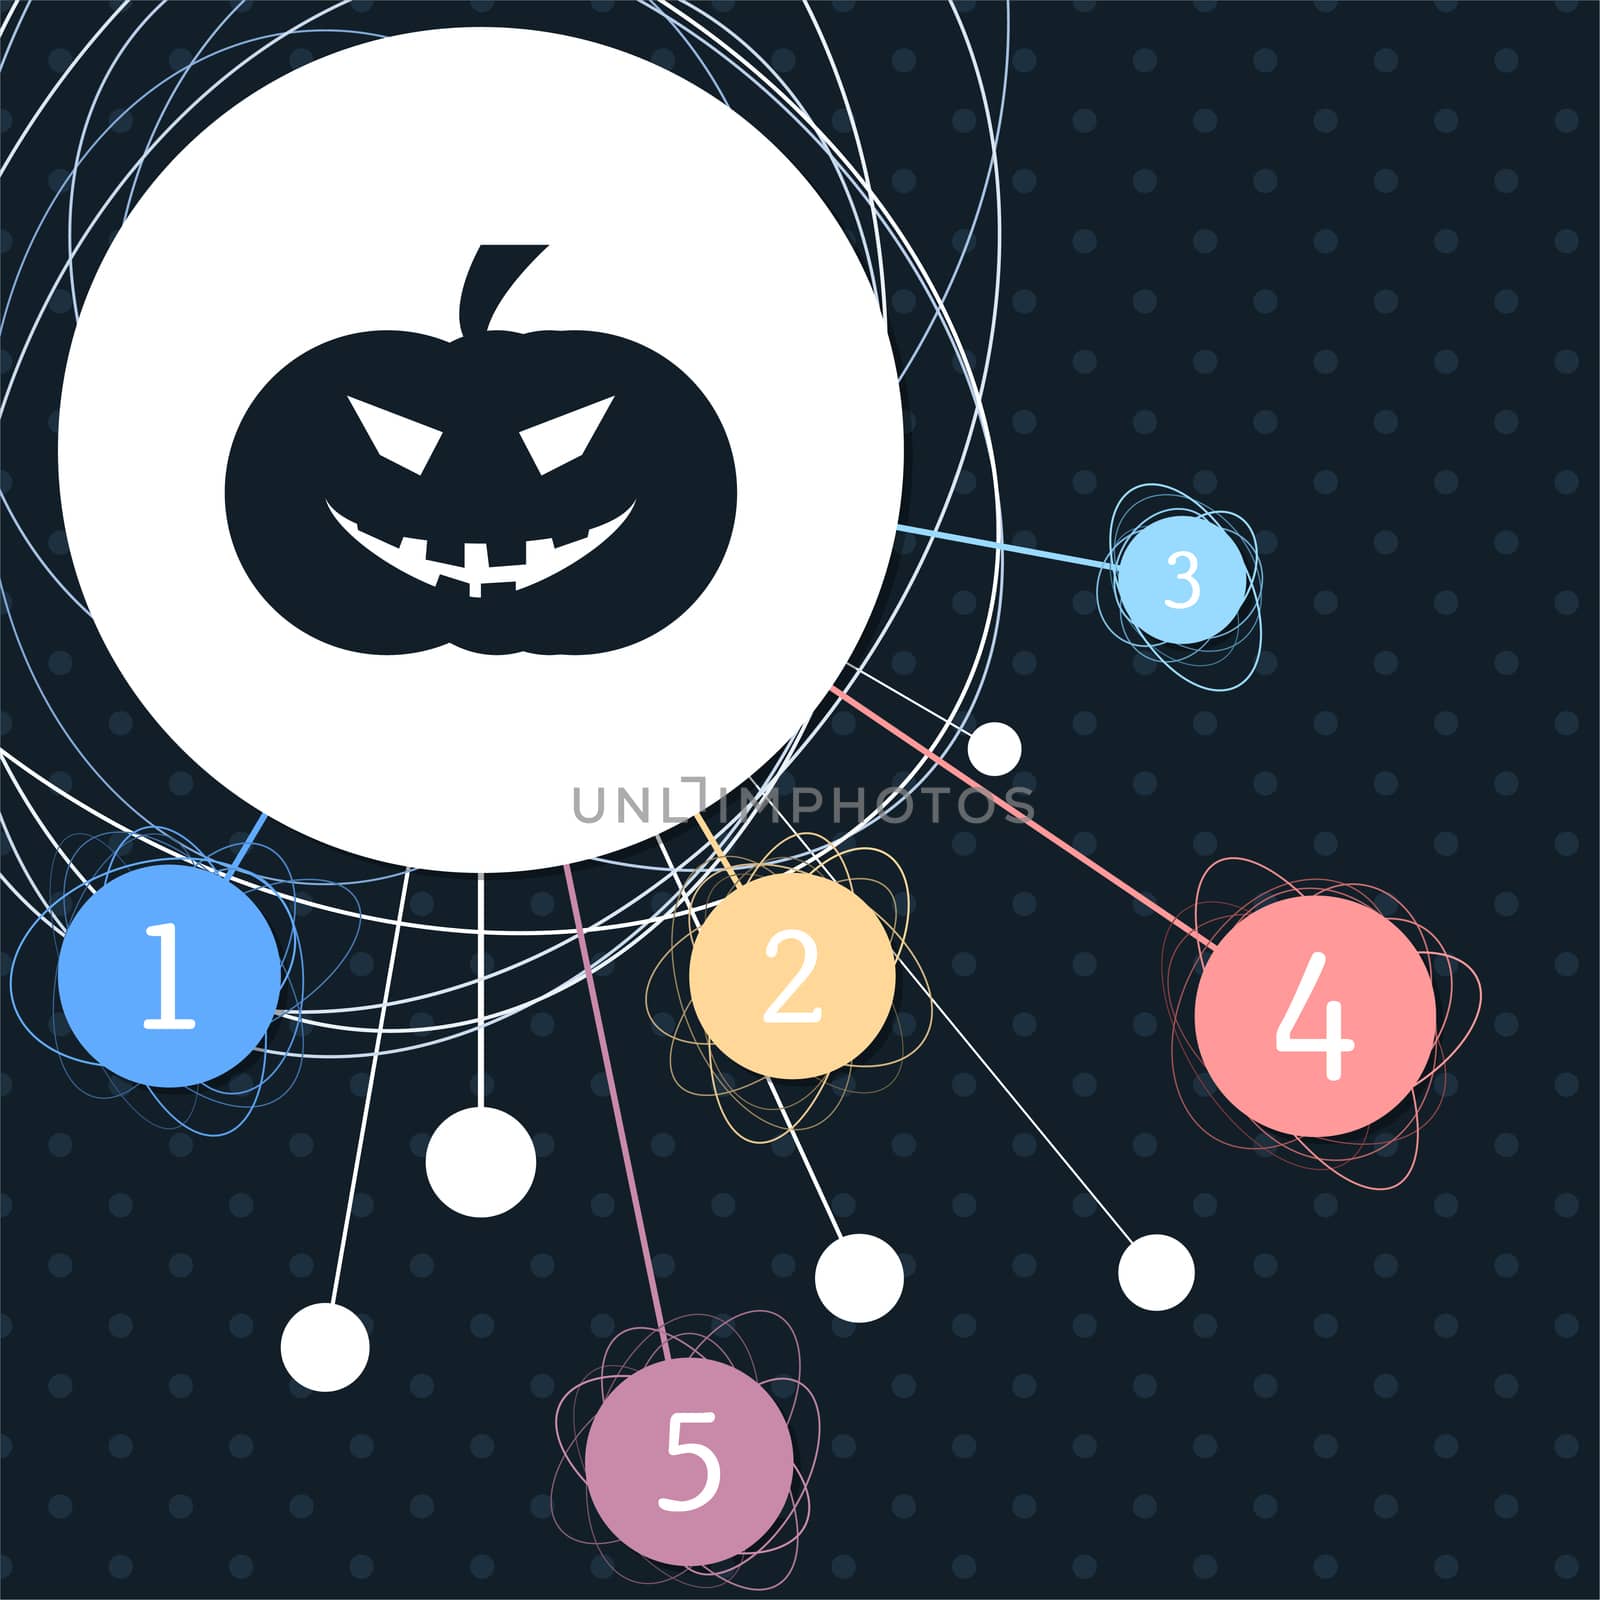 halloween pumpkin icon with the background to the point and with infographic style.  by Adamchuk